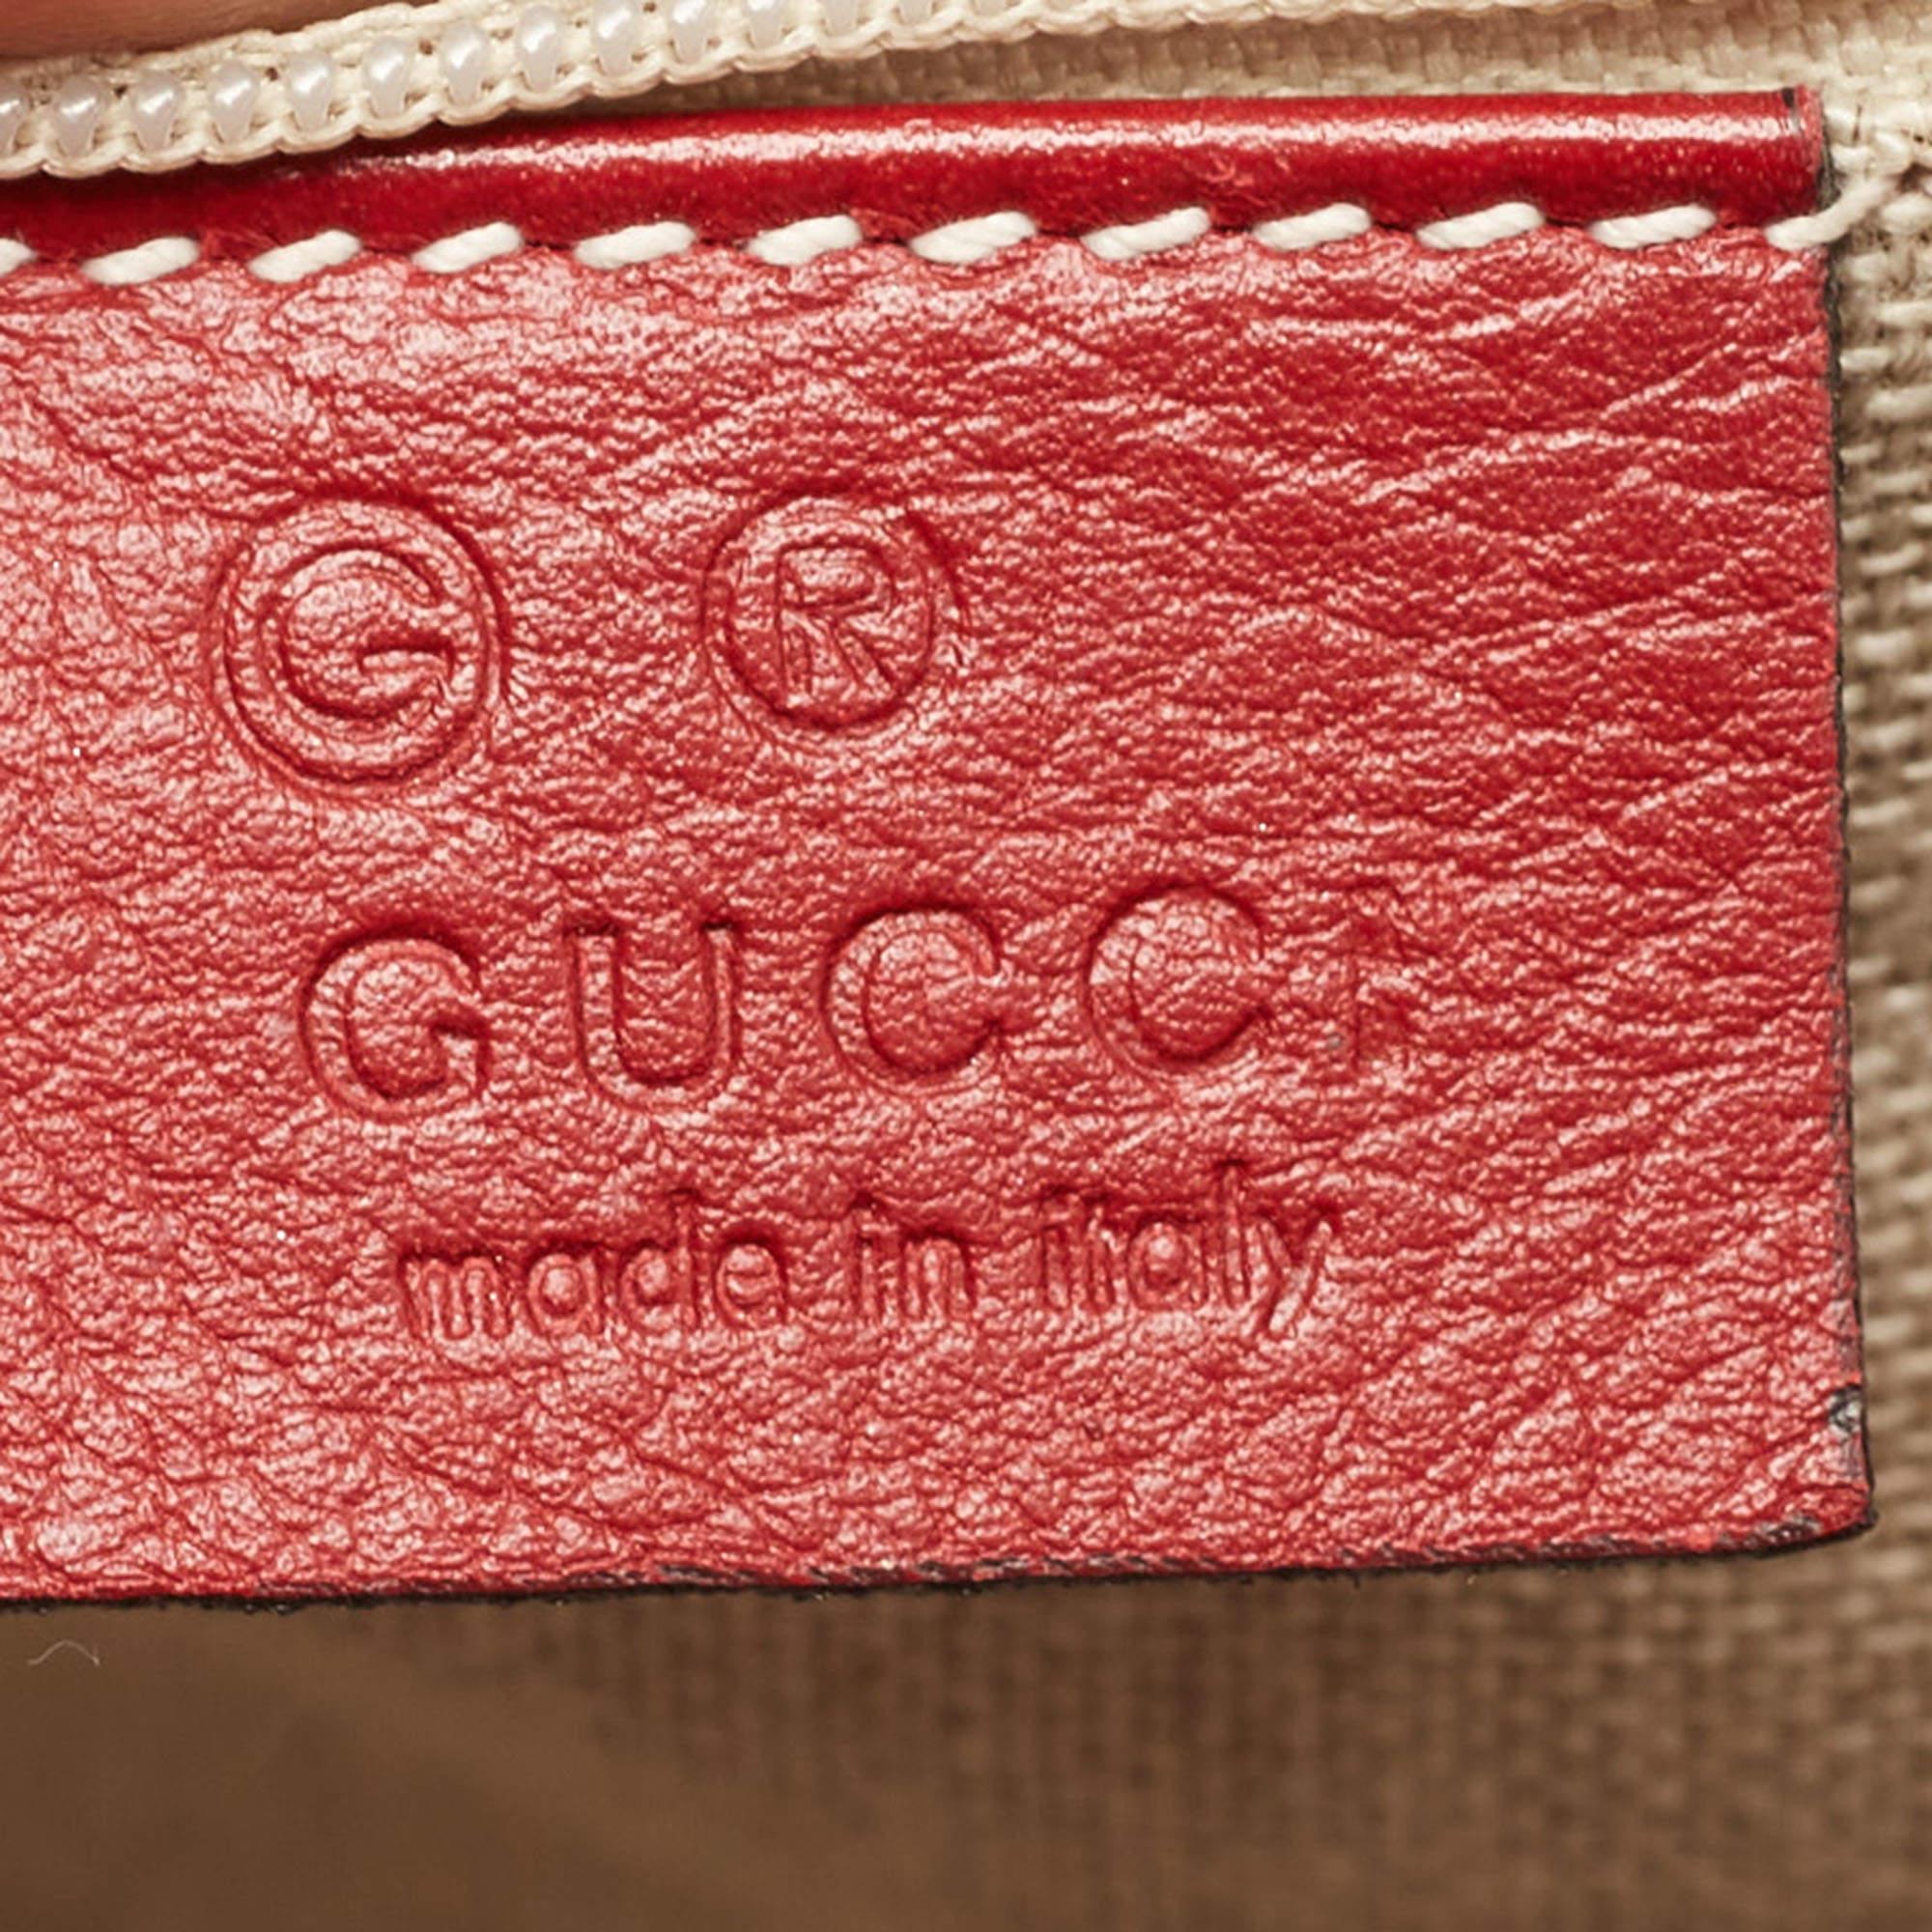 Gucci Red Microguccissima Leather Margaux Tote 5